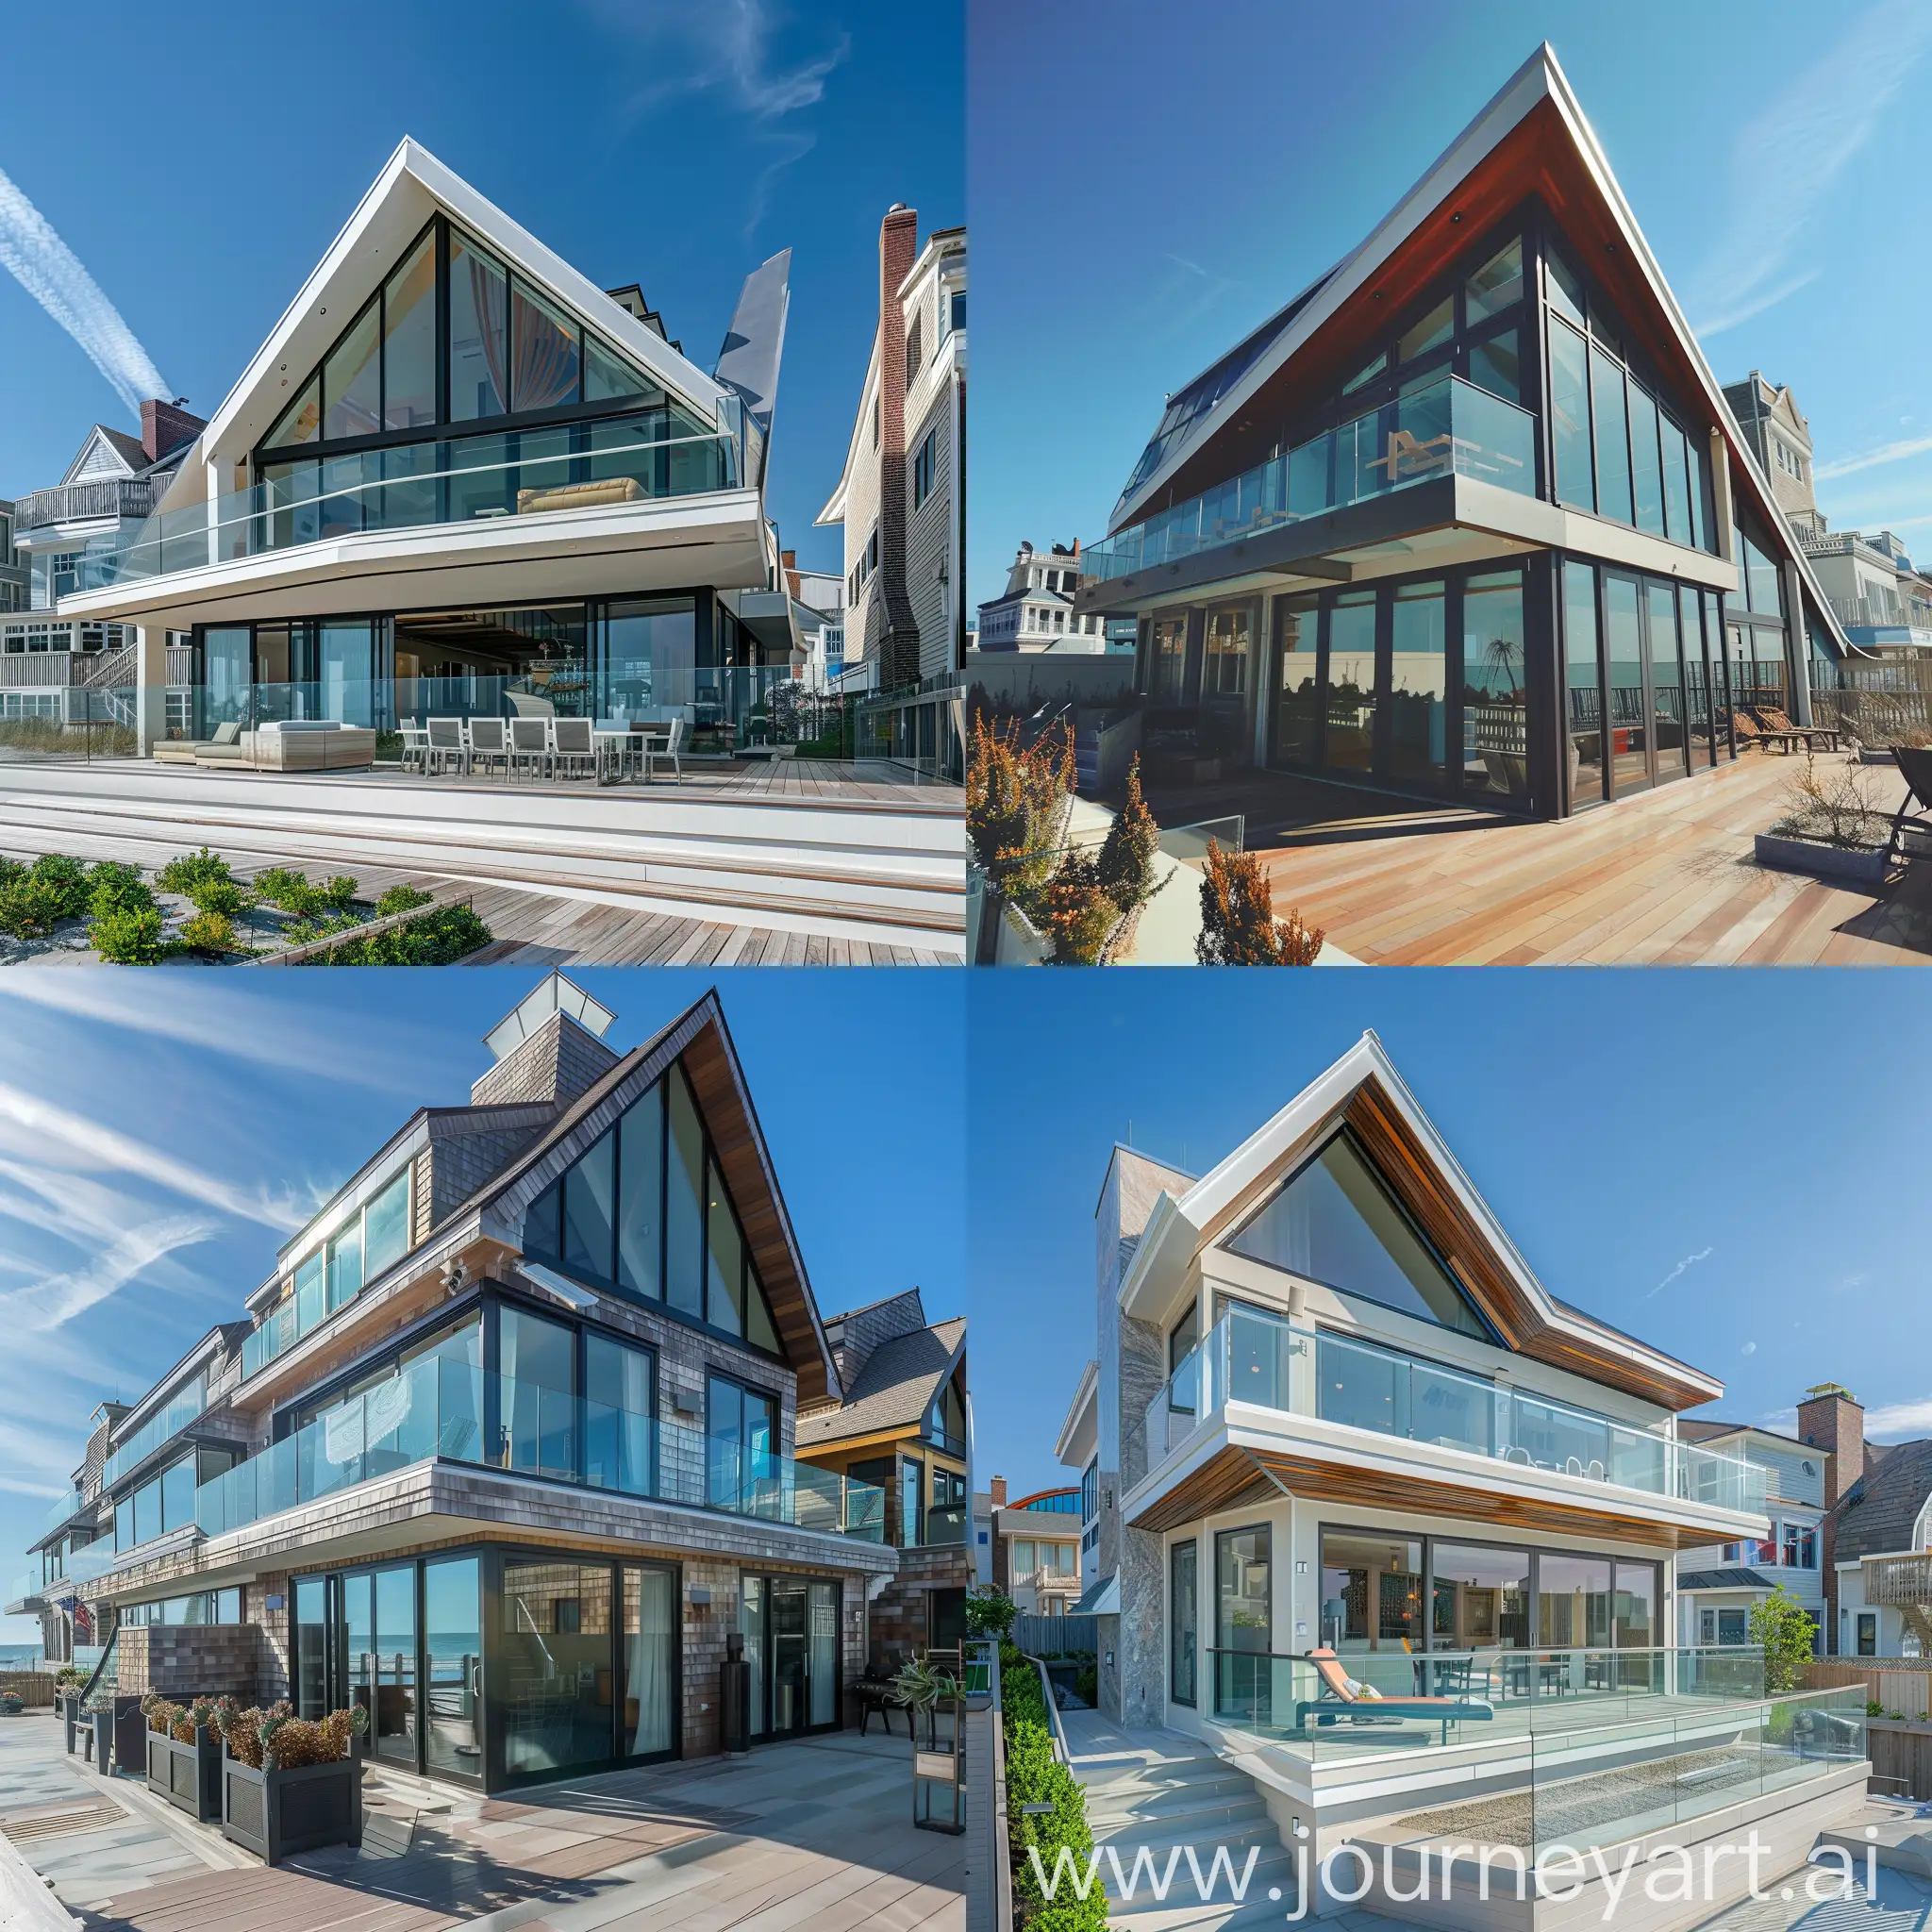 Sunny-Day-Beach-Town-House-with-Sloping-Roof-and-Glass-Windows